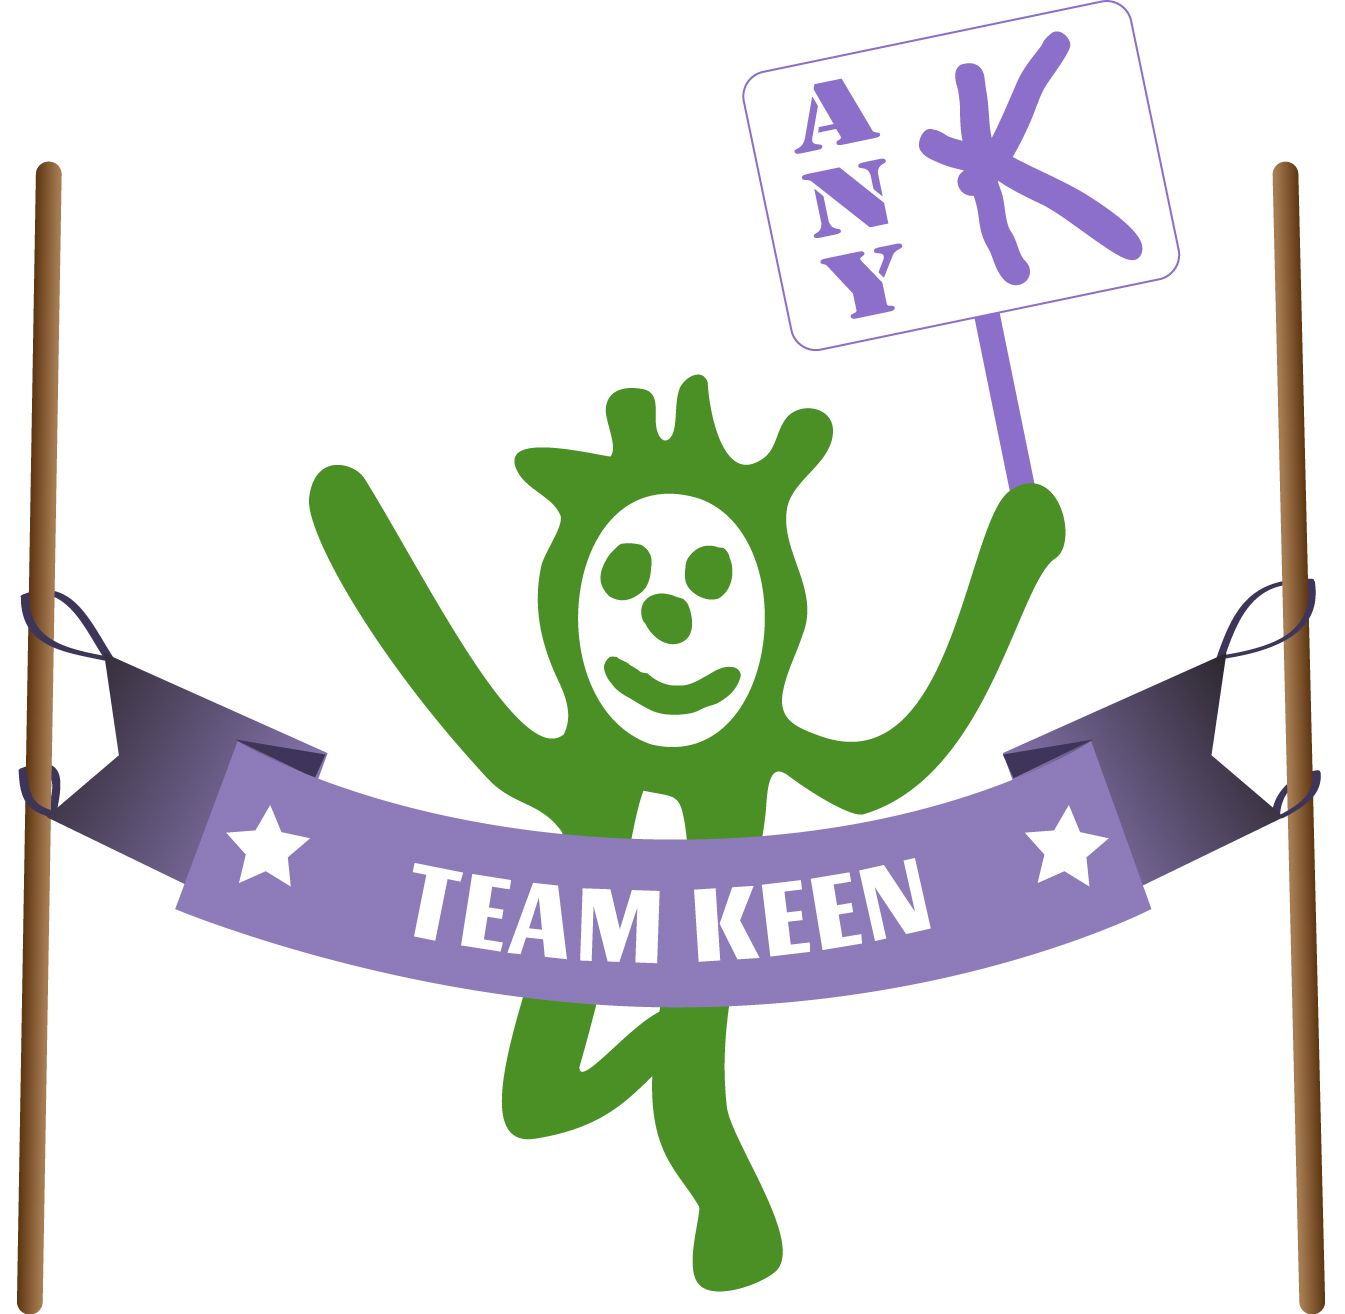 TEAM KEEN with Ken - Annual Any K event